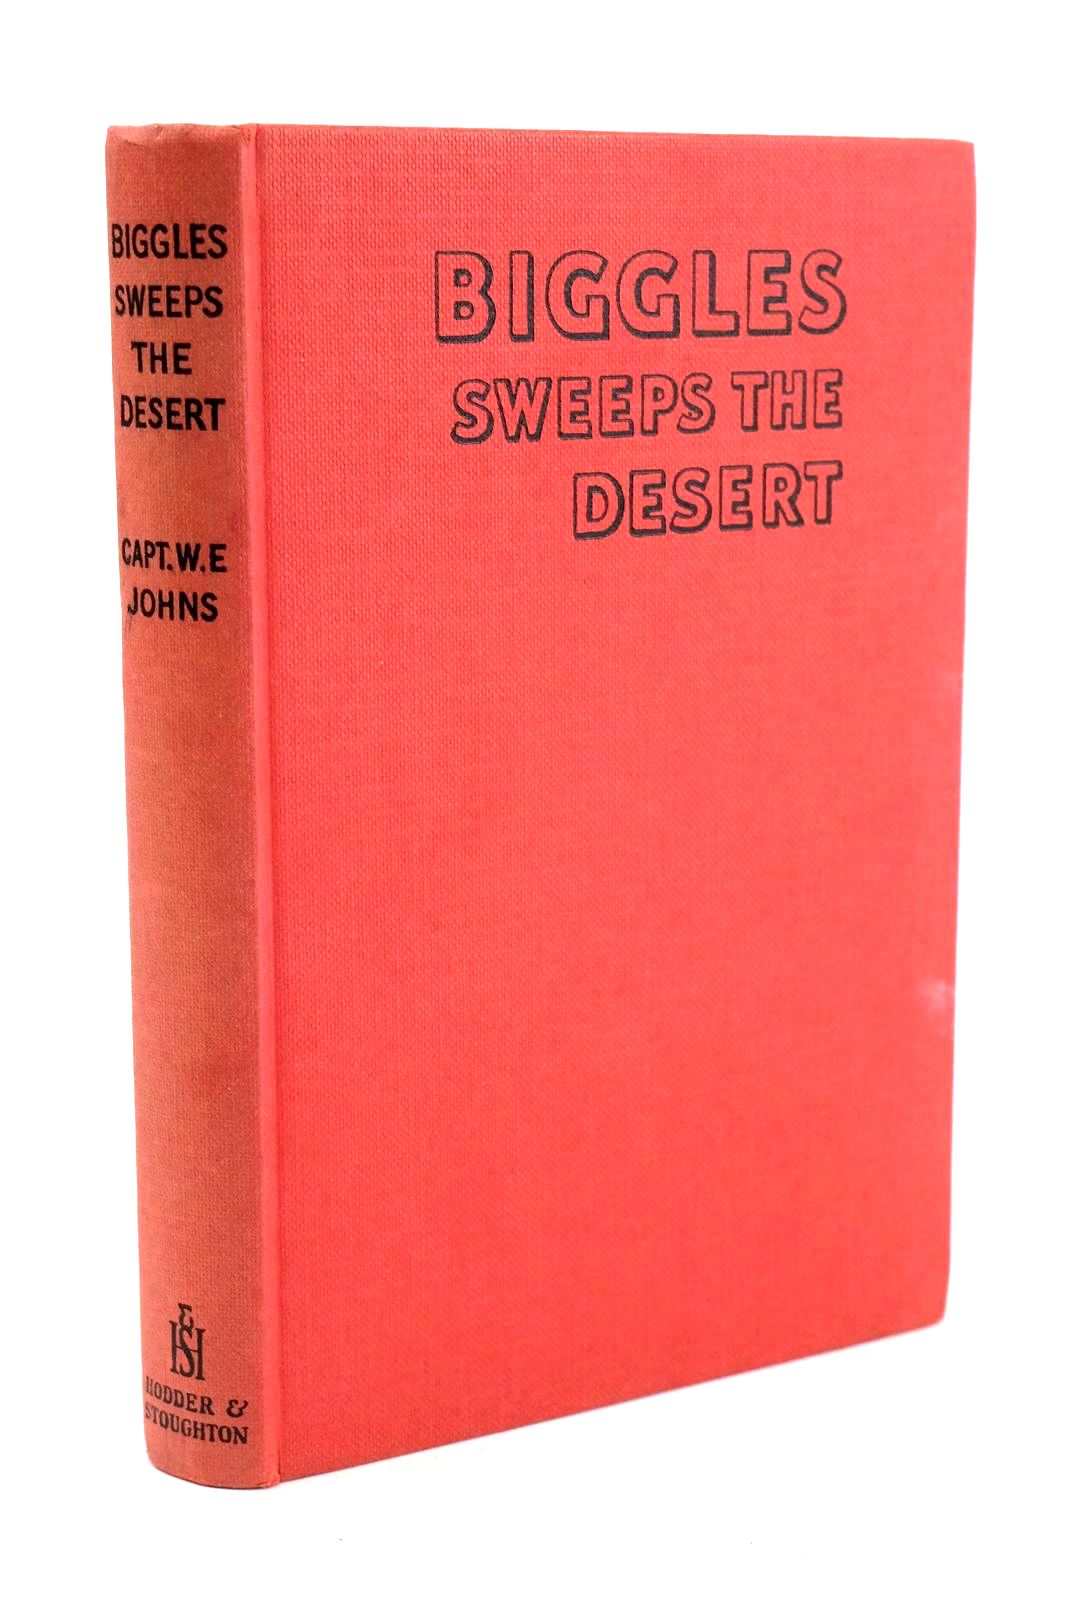 Photo of BIGGLES SWEEPS THE DESERT- Stock Number: 1324258